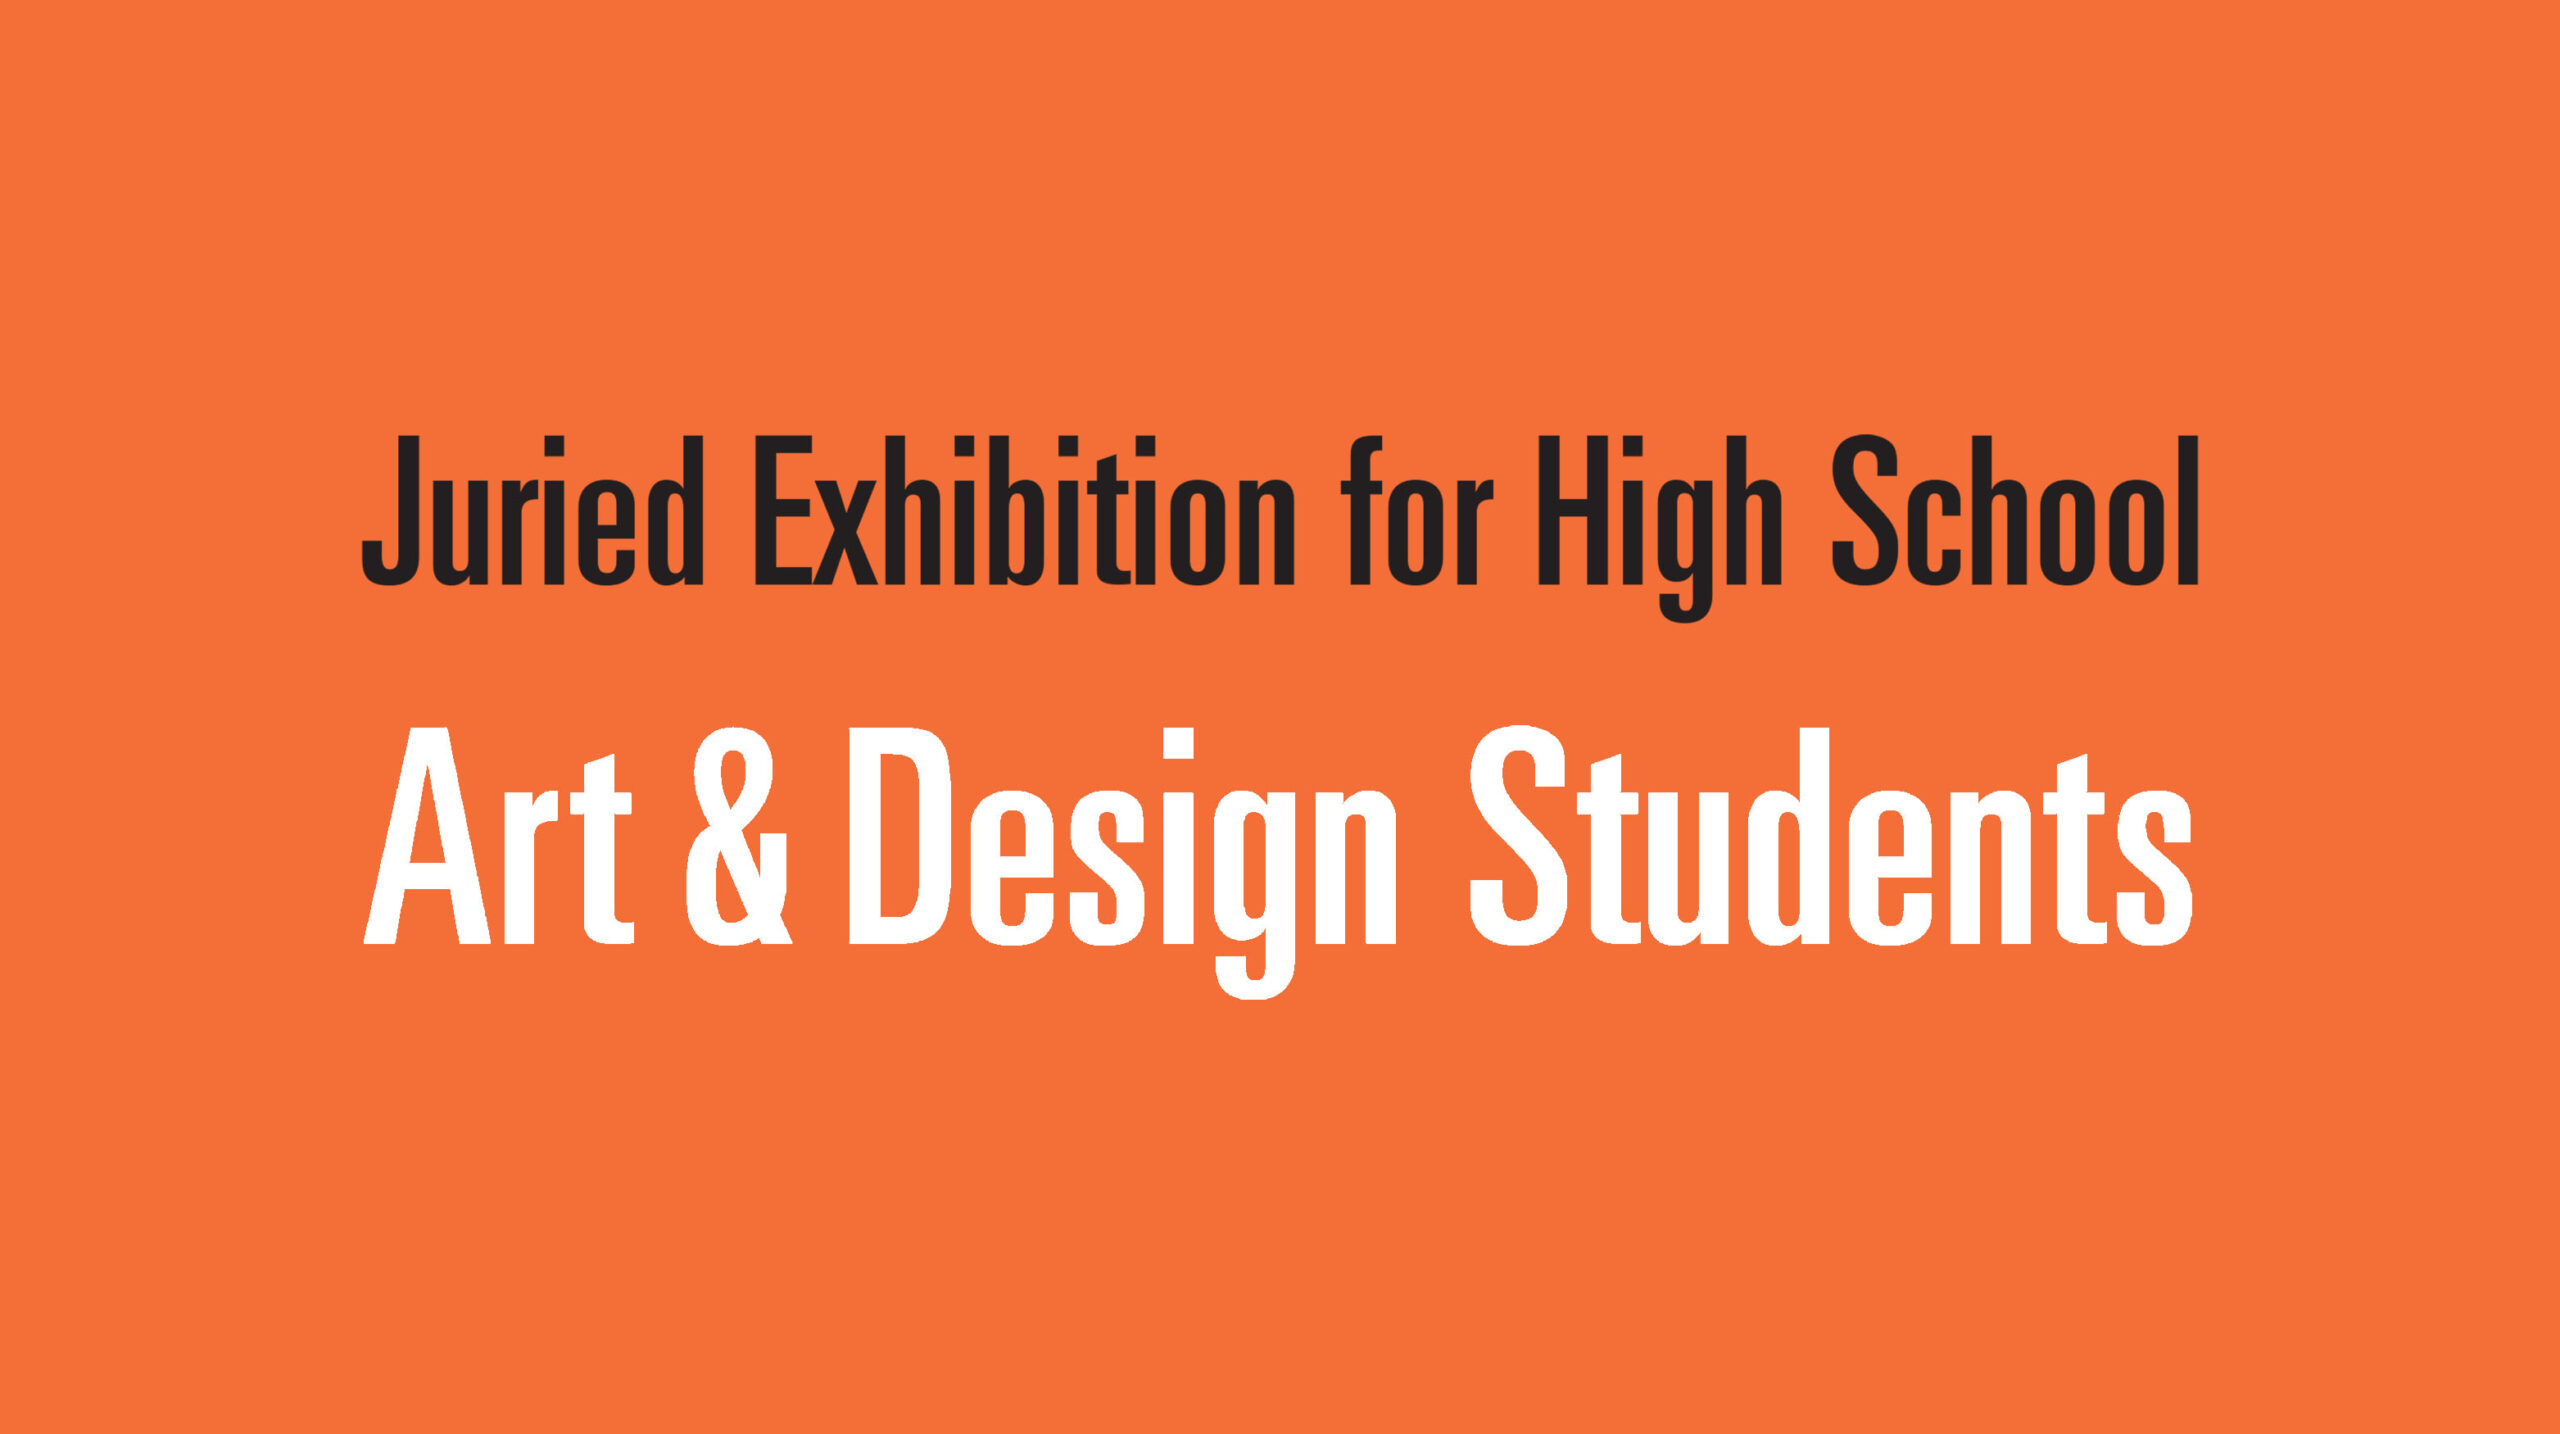 Juried Exhibition for High School Art & Design Students